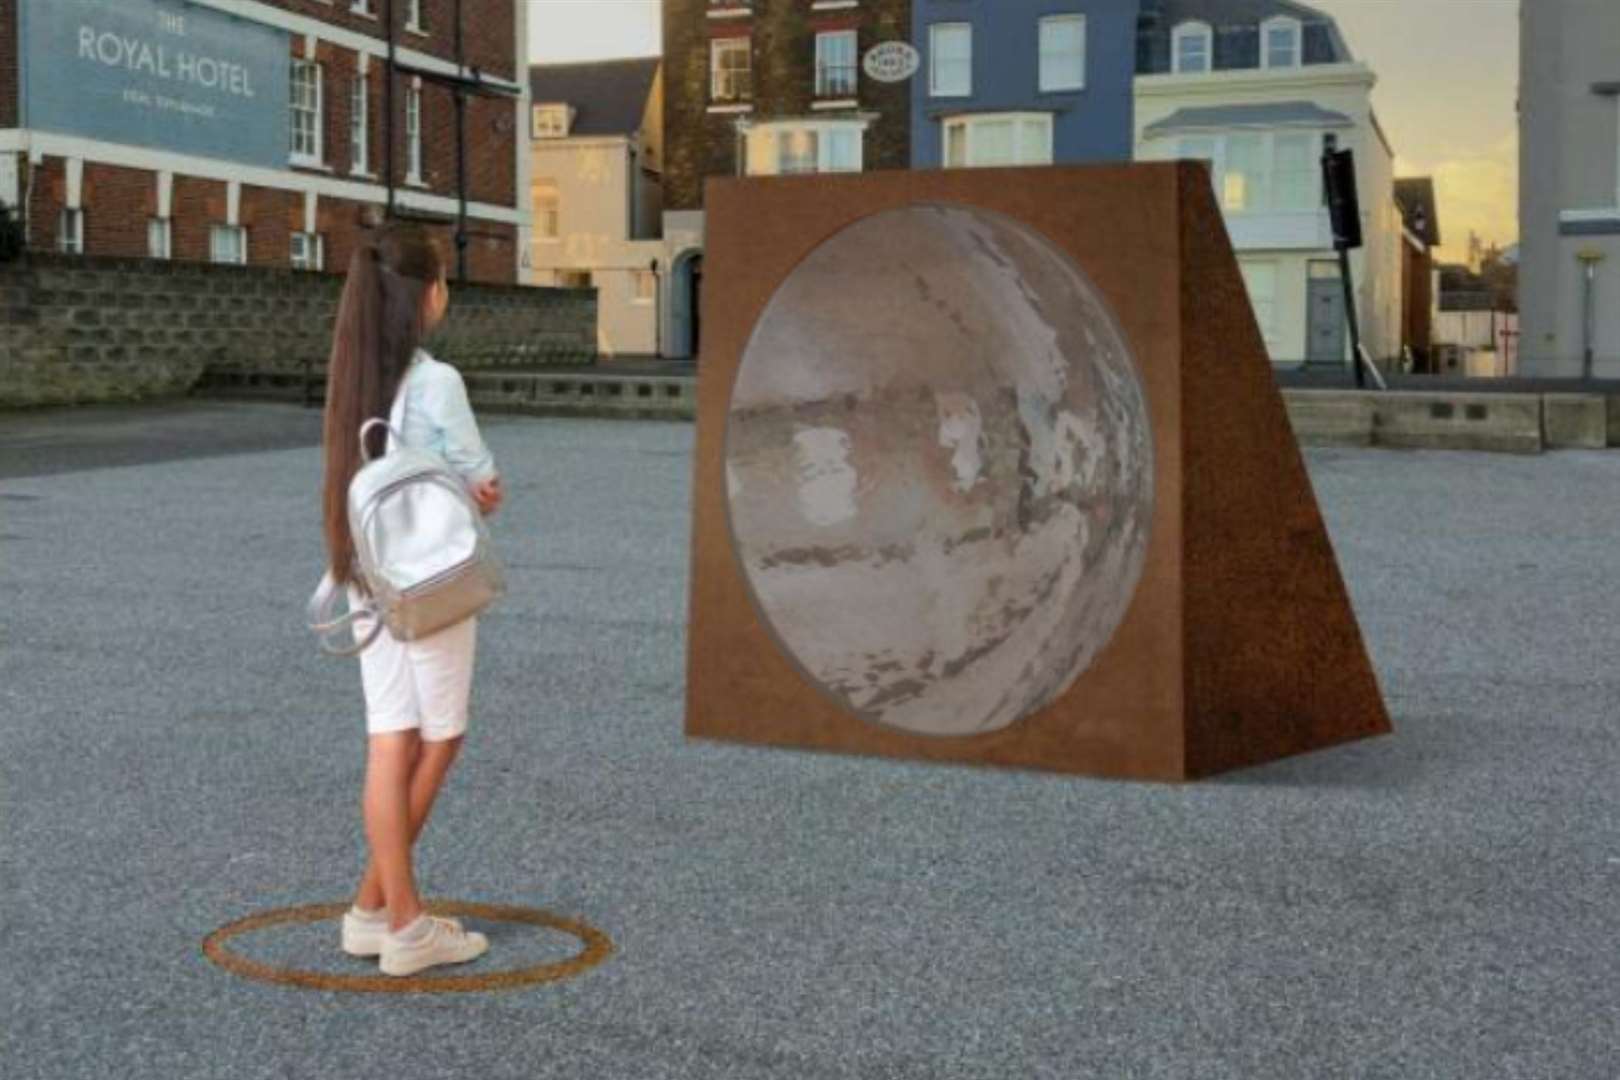 The sound mirror planned for Deal seafront